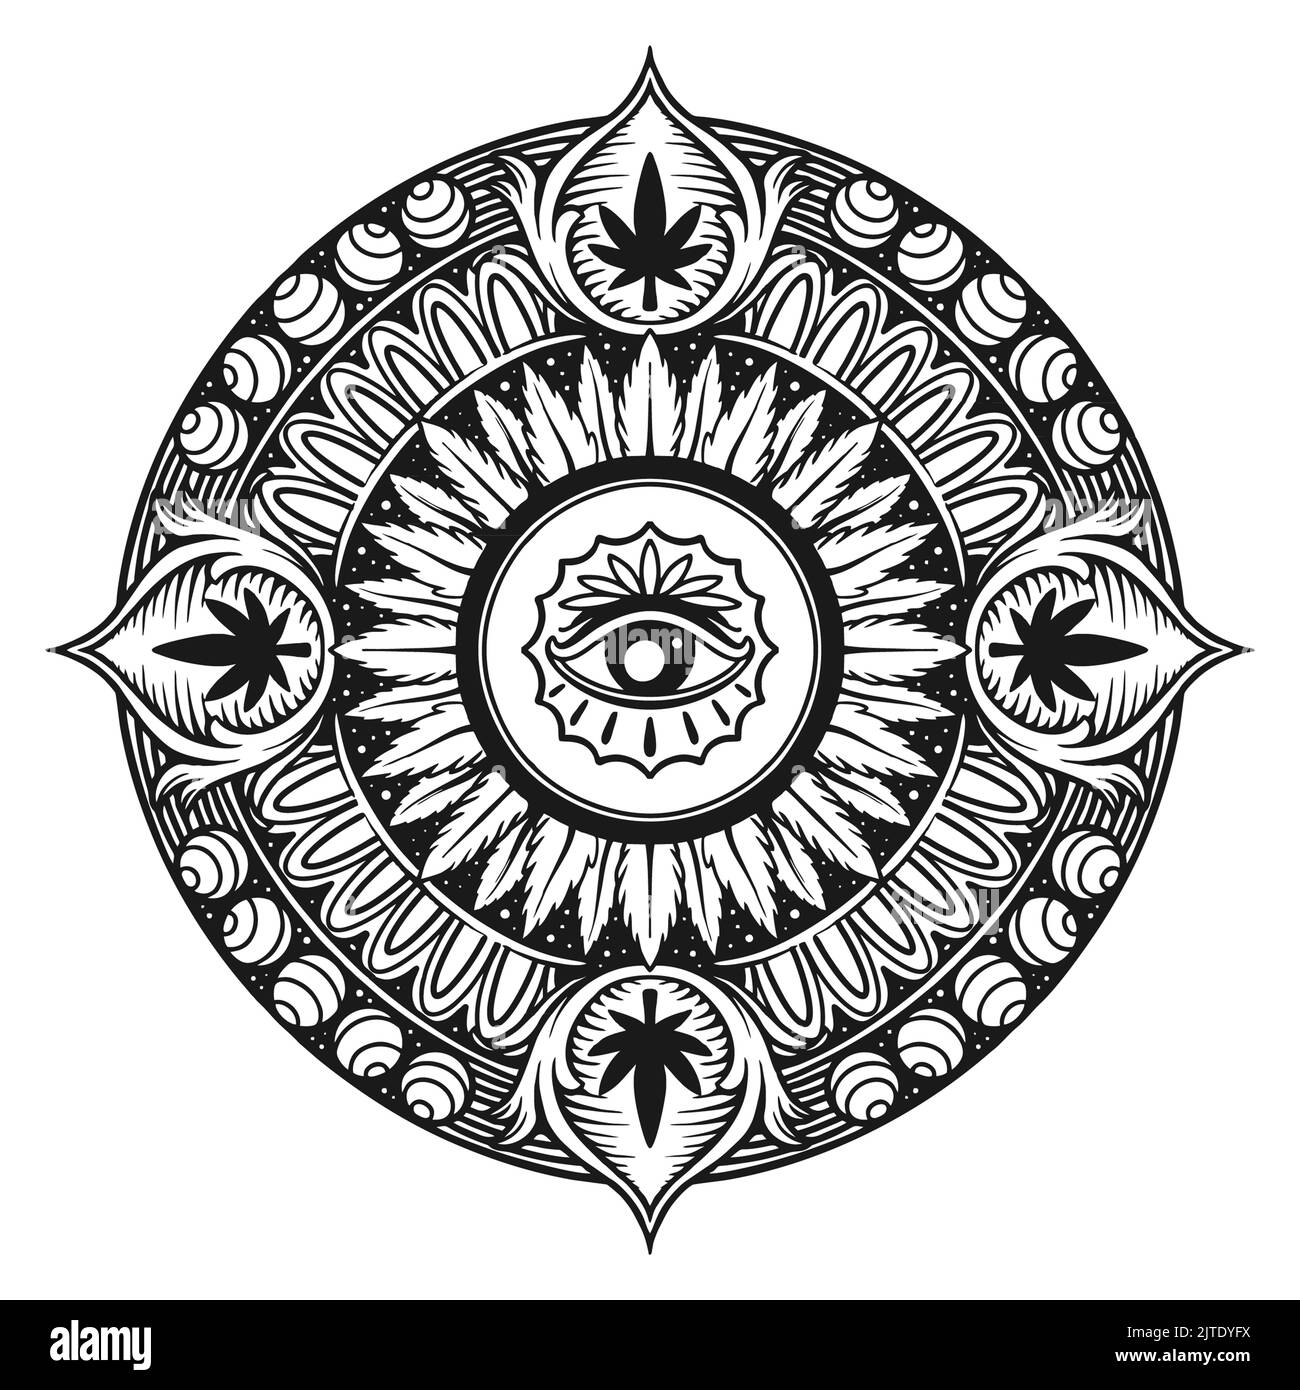 CBD Kush Mandala Silhouette Vector illustrations for your work Logo, mascot merchandise t-shirt, stickers and Label designs, poster, greeting cards ad Stock Photo